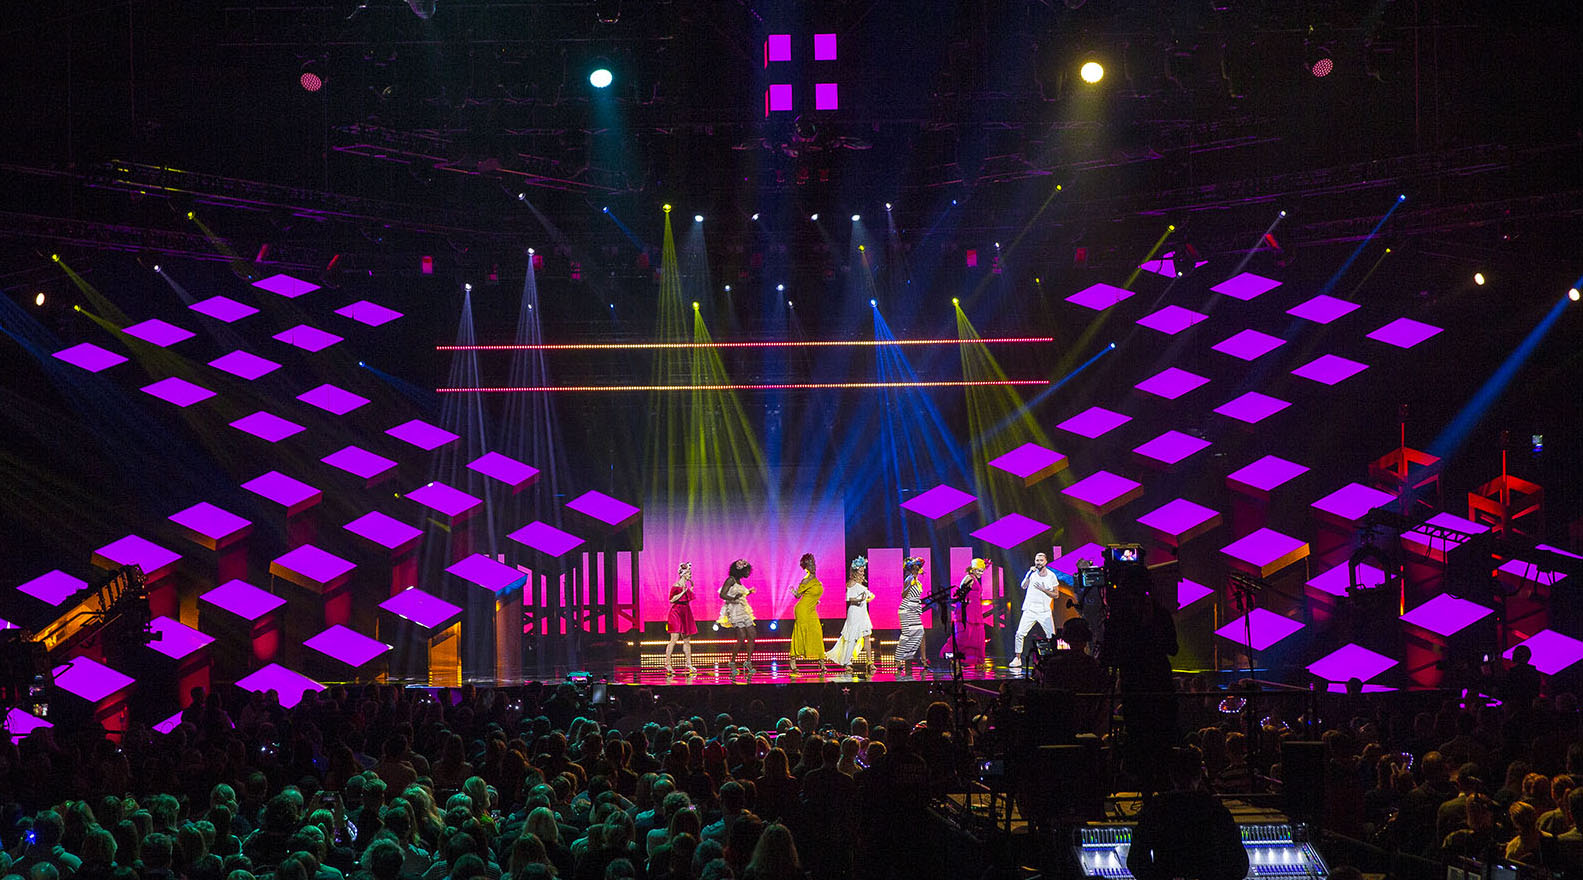 RWS Invests in Kinesys Apex System for 2018 Melodifestivalen